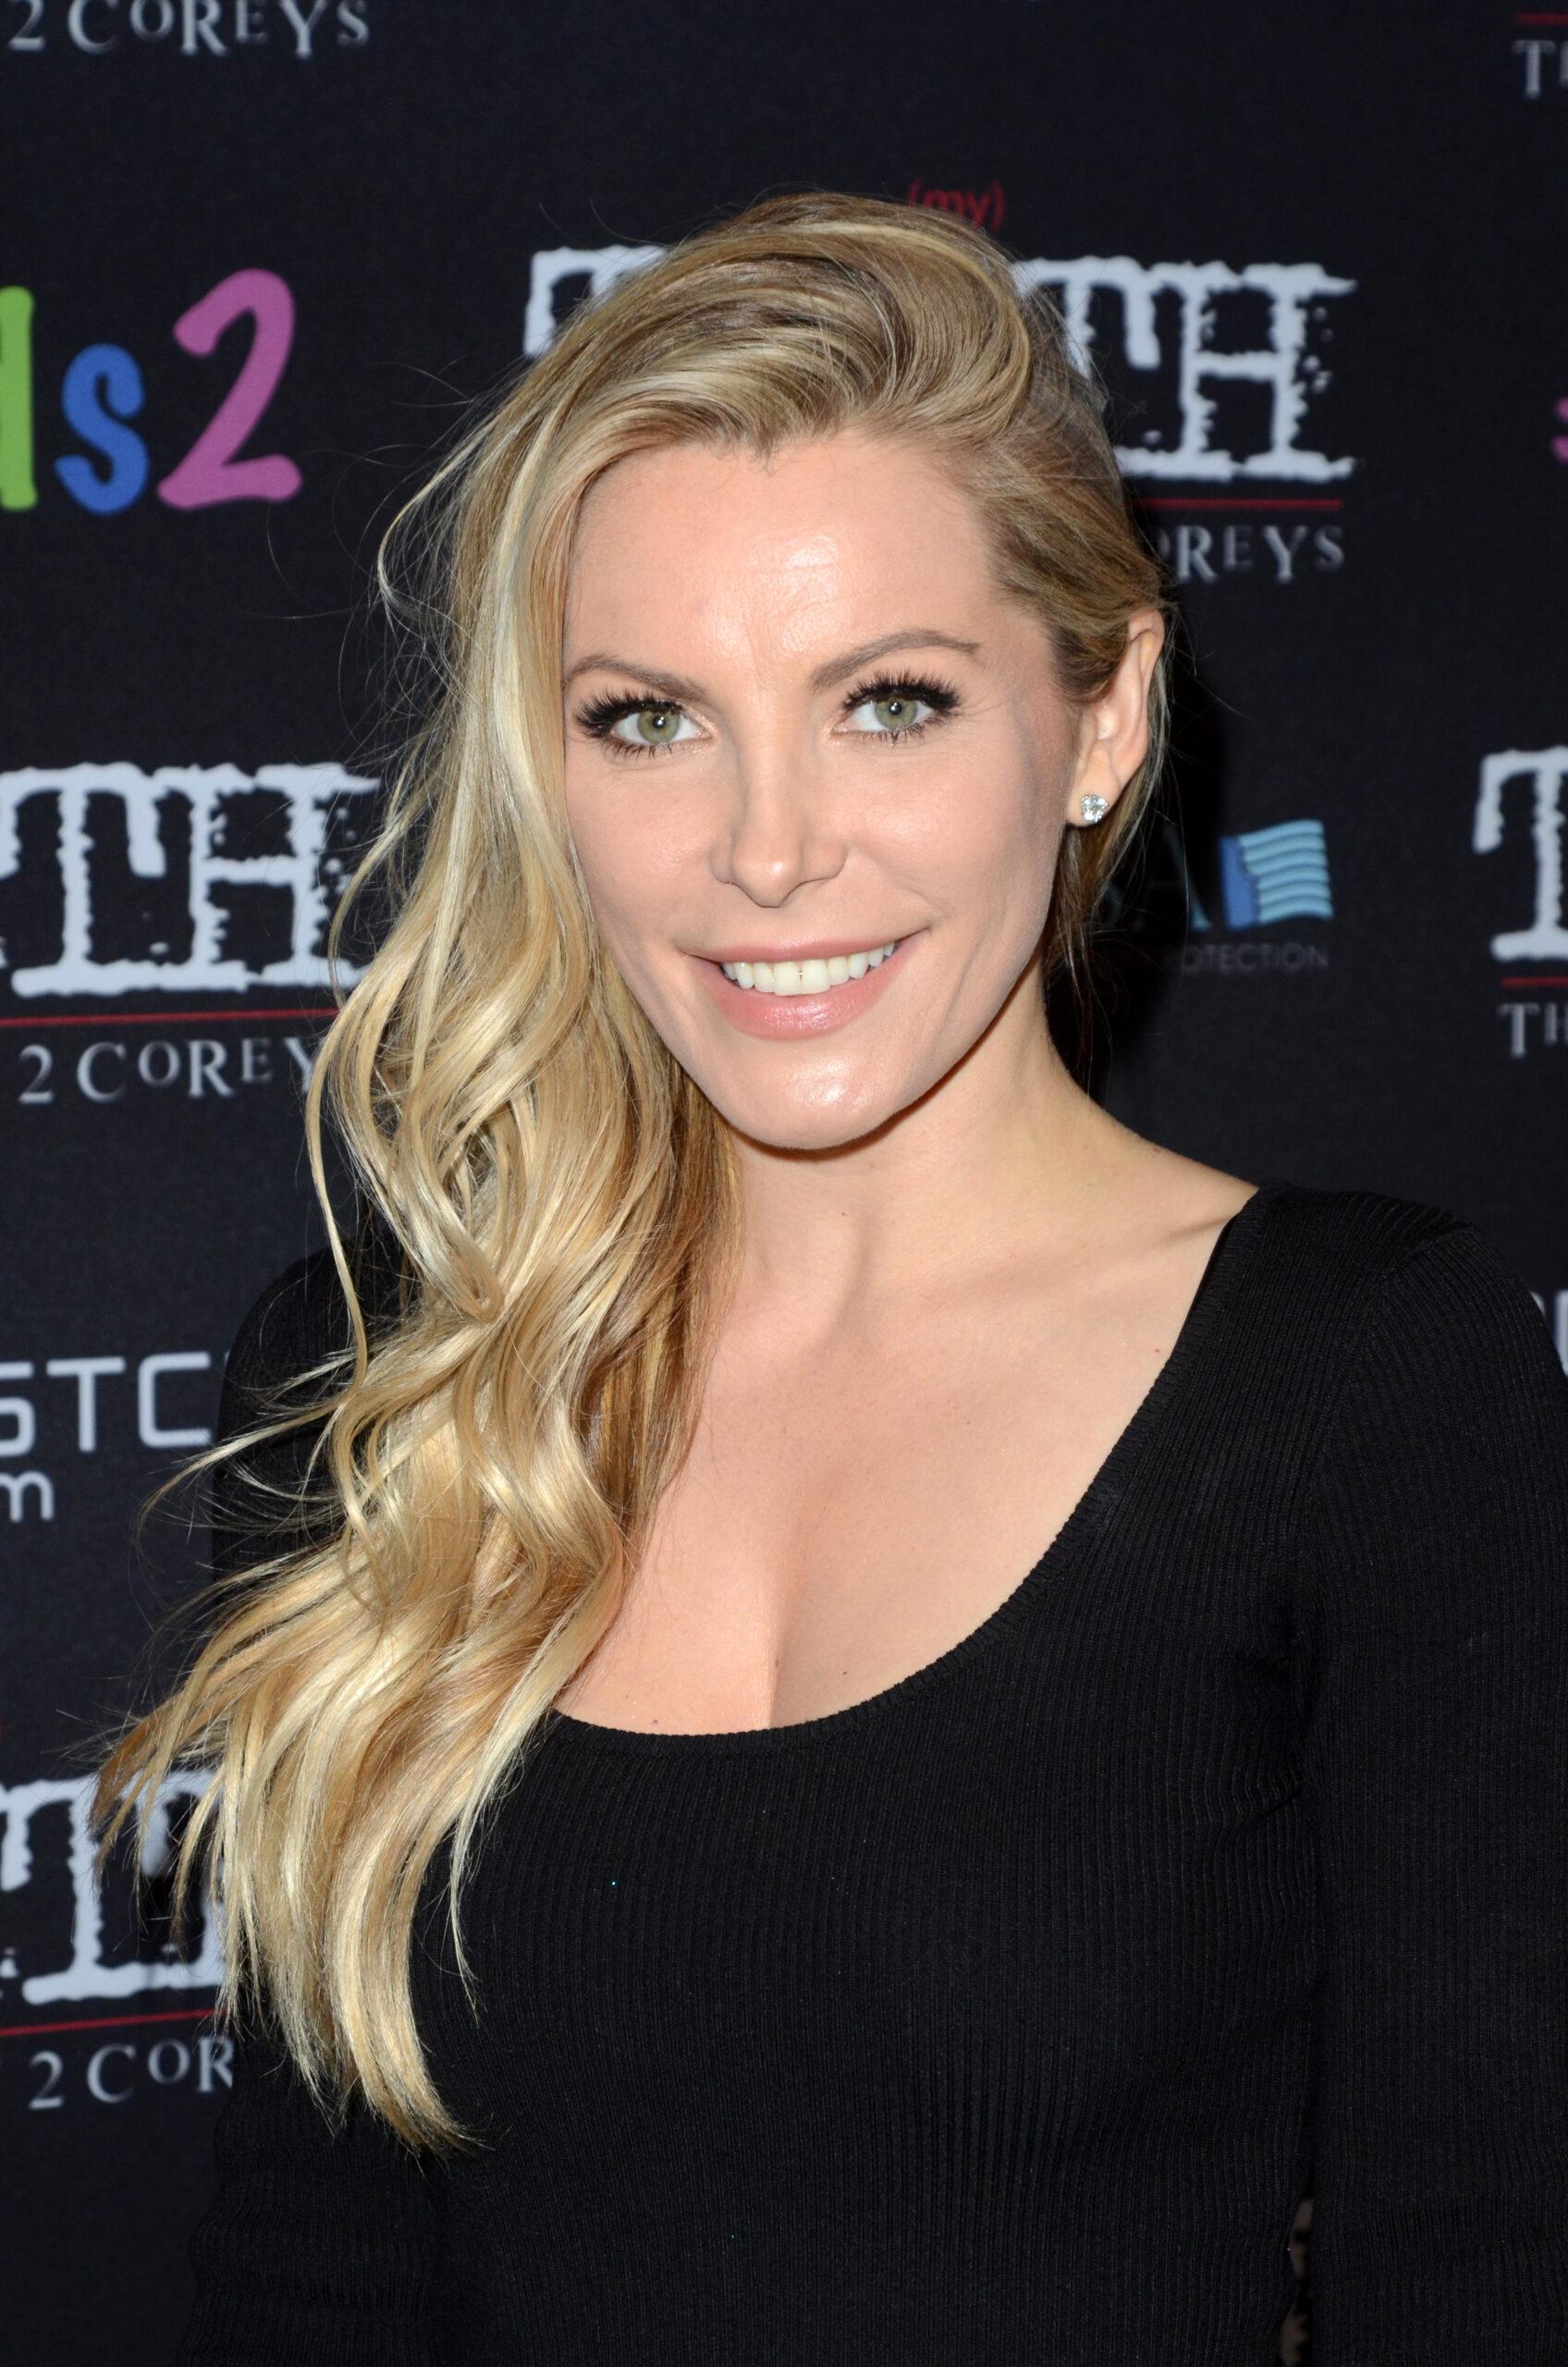 Crystal Hefner at "(My) Truth: The Rape of 2 Coreys" L.A. Premiere